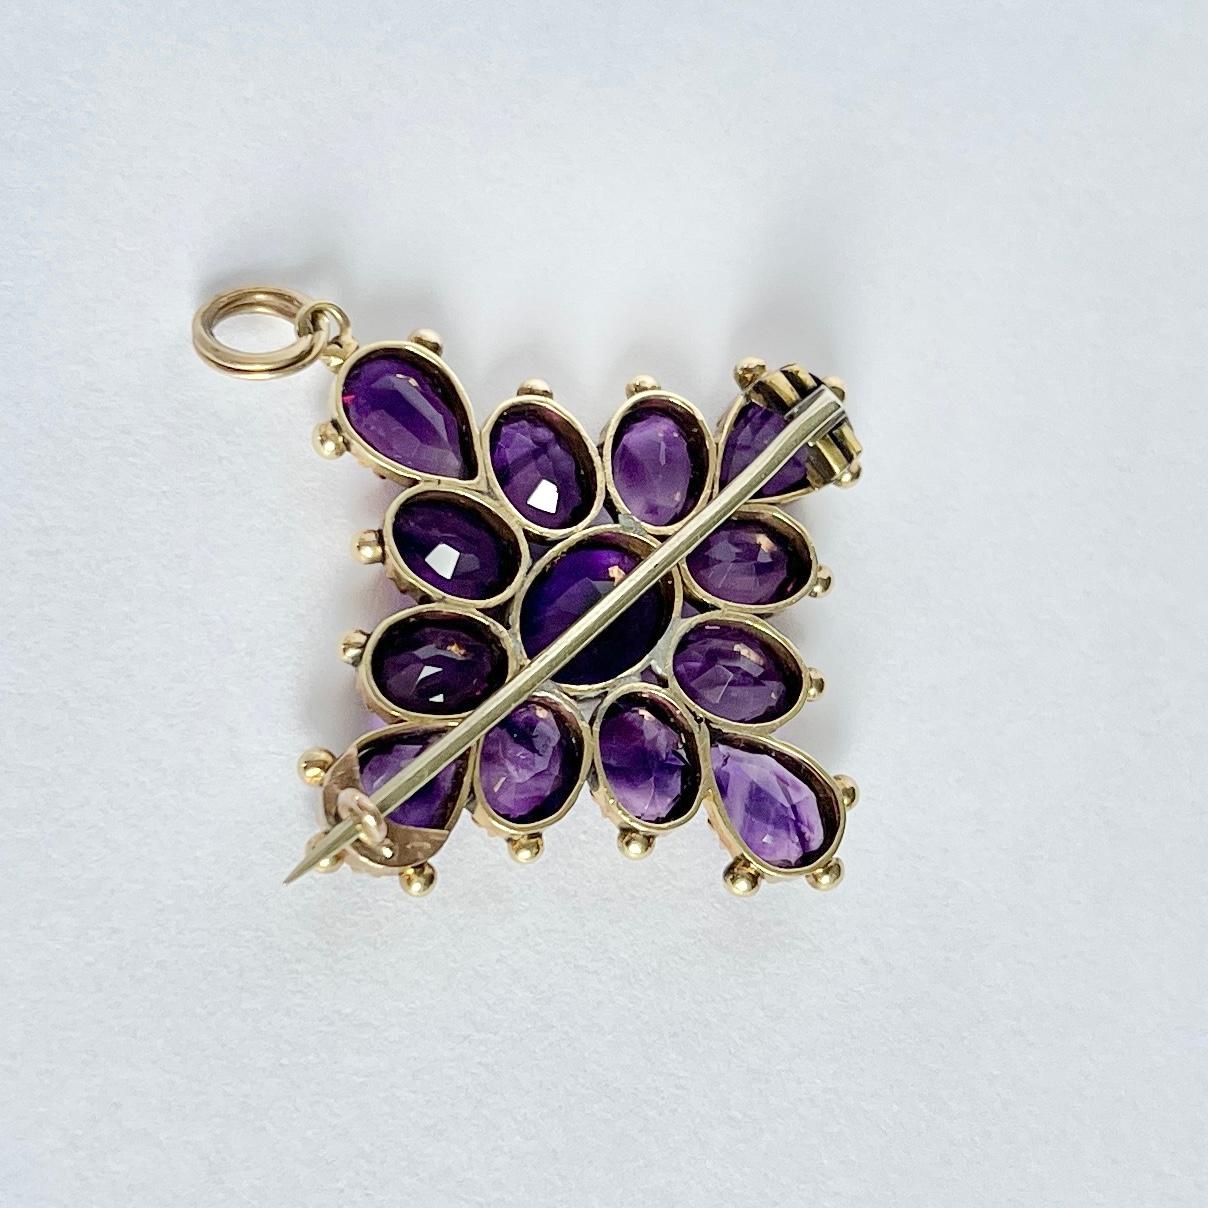 Round Cut Art Deco Amethyst and 9 Carat Gold  Pendant or Brooch